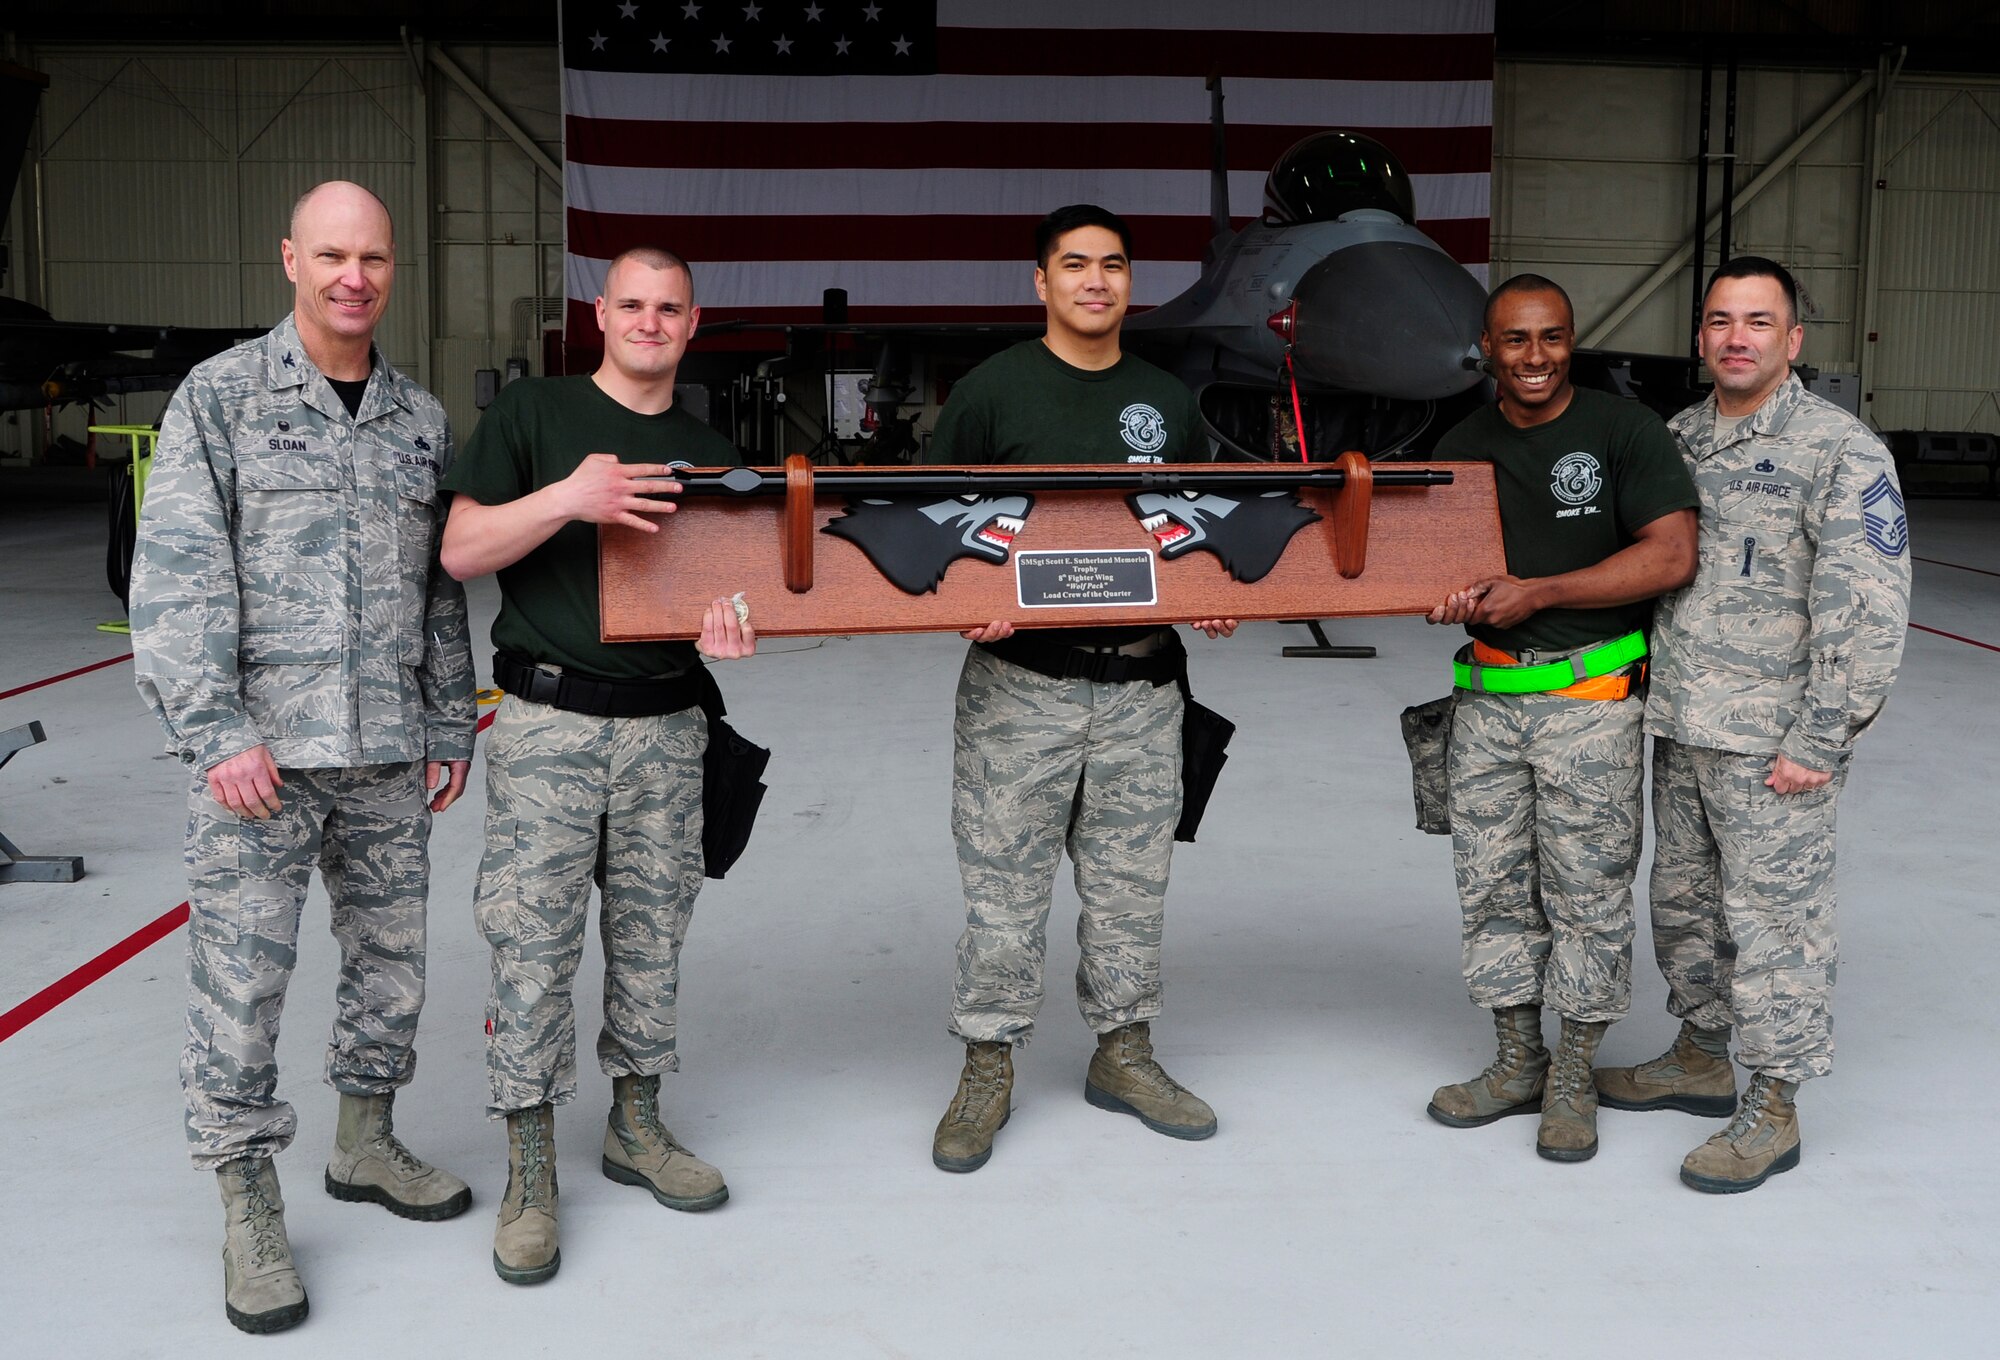 The 8th MXS won the first quarter load crew of the quarter competition for the third consecutive quarter in a row at Kunsan Air Base, Republic of Korea, April 8, 2016. This is the first time in Wolf Pack history this has ever been achieved by an augmented load crew. Three-man teams of Airmen from Kunsan's 80th and 35th Aircraft Maintenance Units battled it out against Airmen from the 8th MXS during 2016’s first-quarter Load Crew of the Quarter competition to showcase teamwork, precision and attention to detail among Airmen. (U.S. Air Force photo by Staff Sgt. Nick Wilson/Released)